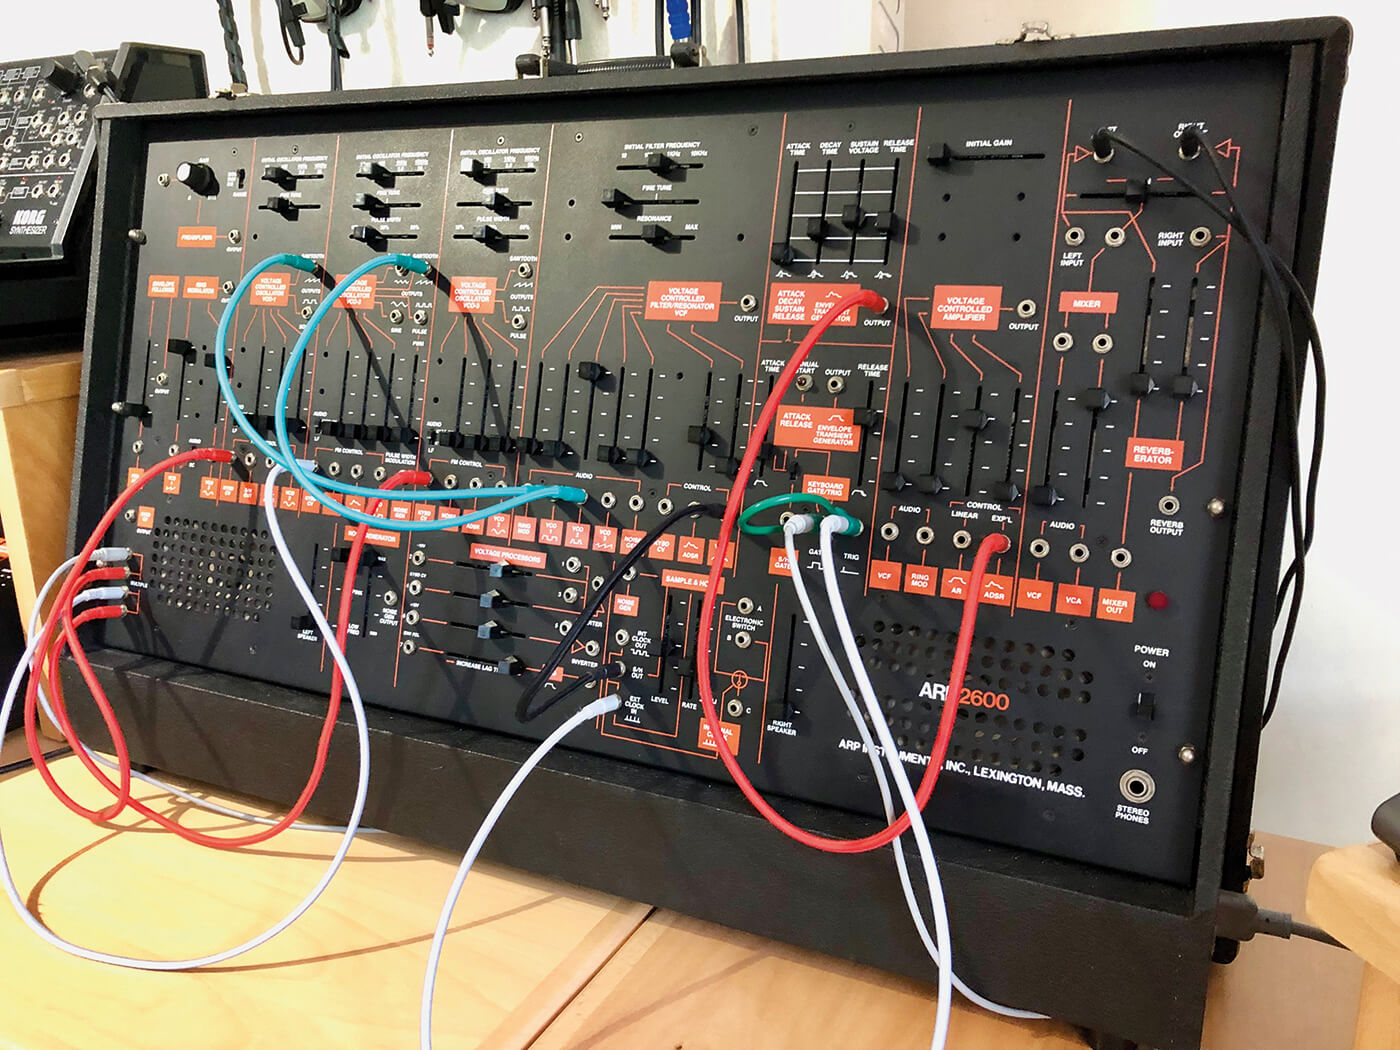 The ARP-2600 - An important synthesizer from the 1970s